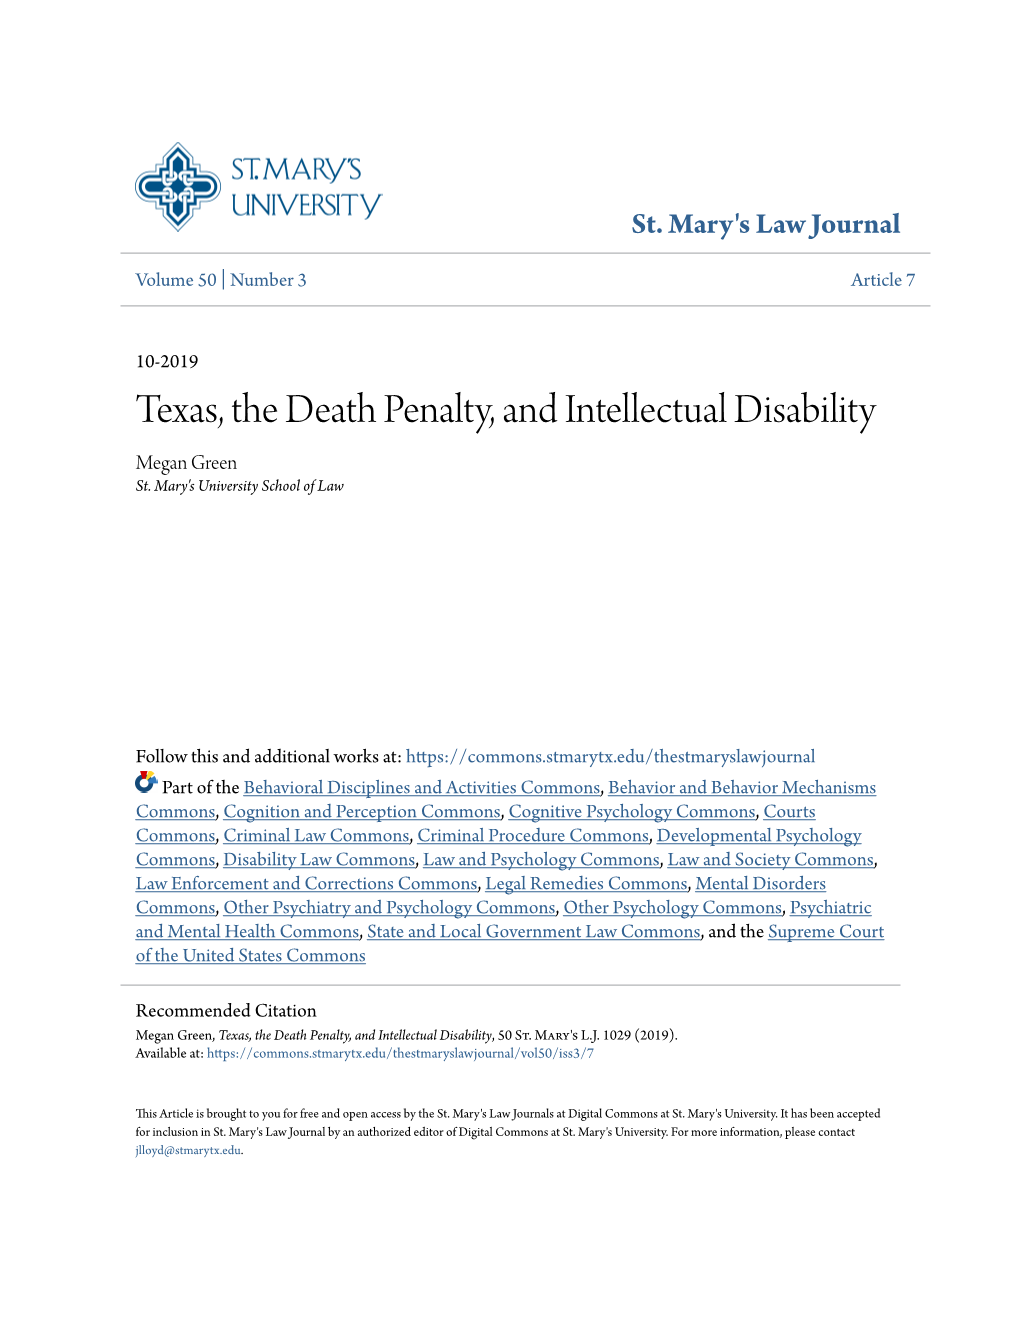 Texas, the Death Penalty, and Intellectual Disability Megan Green St